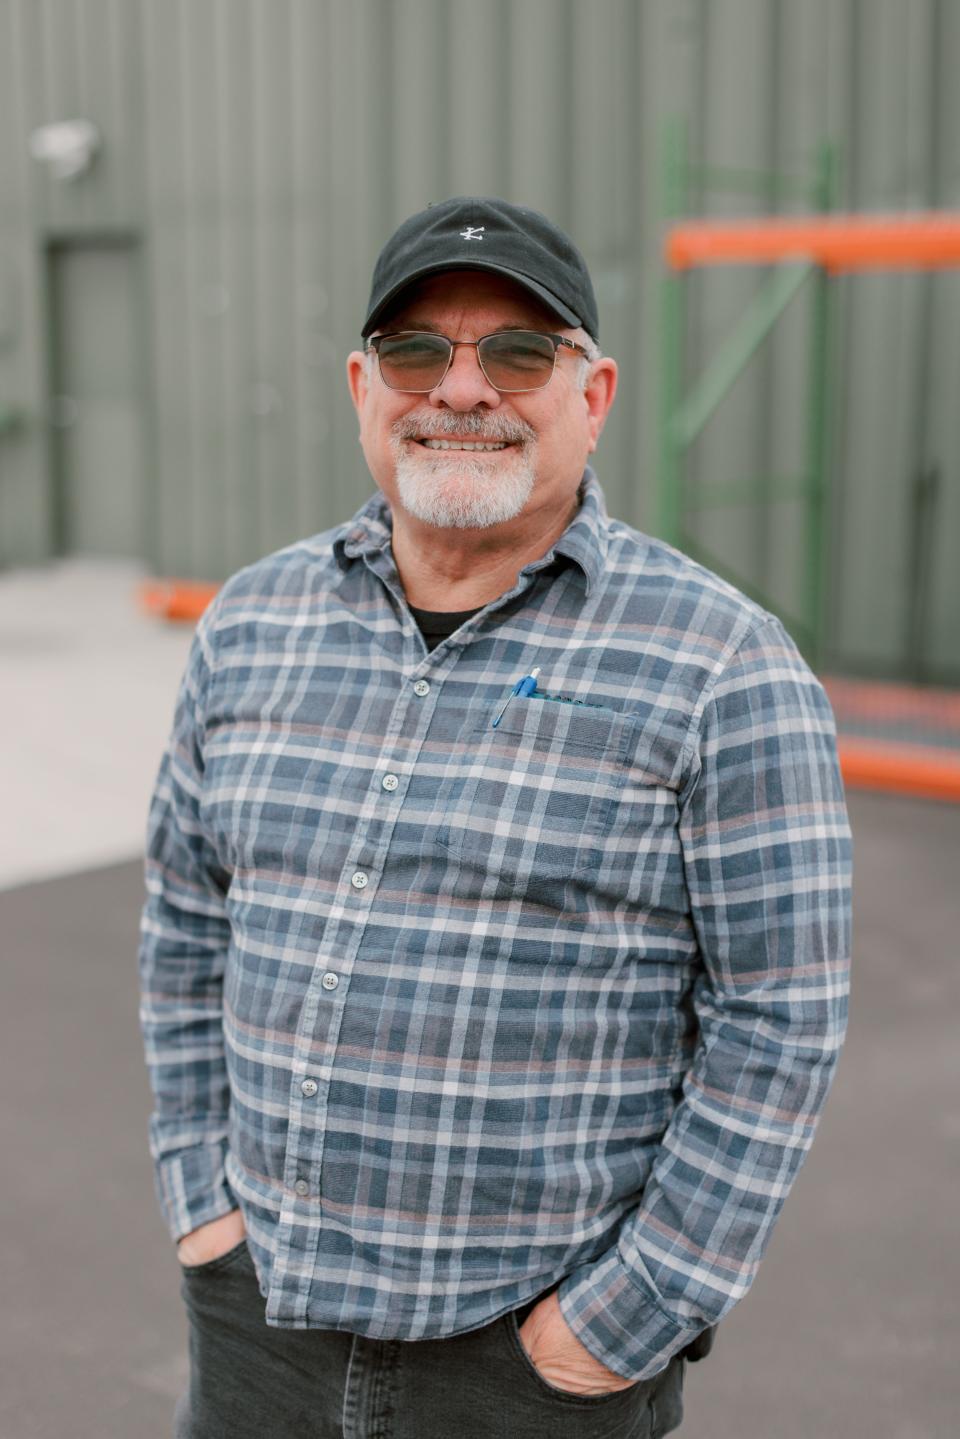 Michael Lehr is a construction and energy technician at Manteca Unified School District.